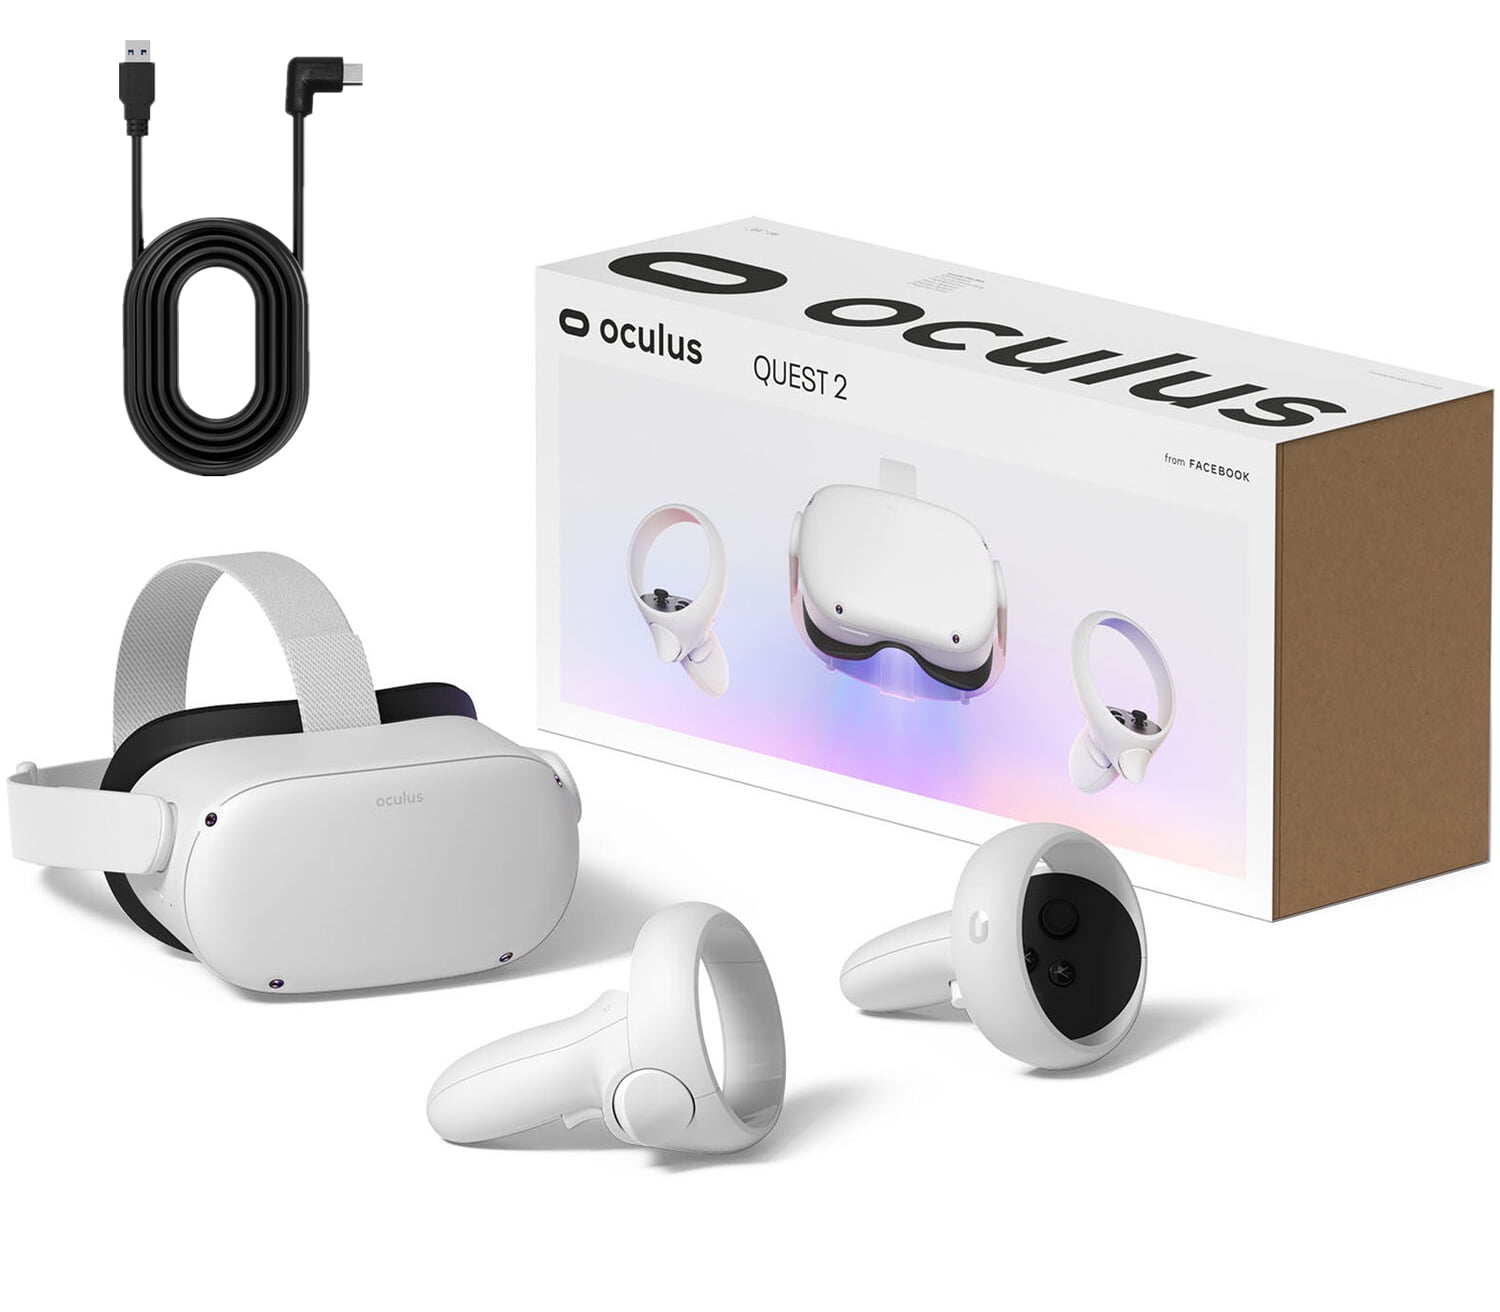 Oculus Quest 2 - Advanced All-In-One Virtual Reality Gaming Headset - White  - 64GB Video - 15FT USB Type-C Link Cable